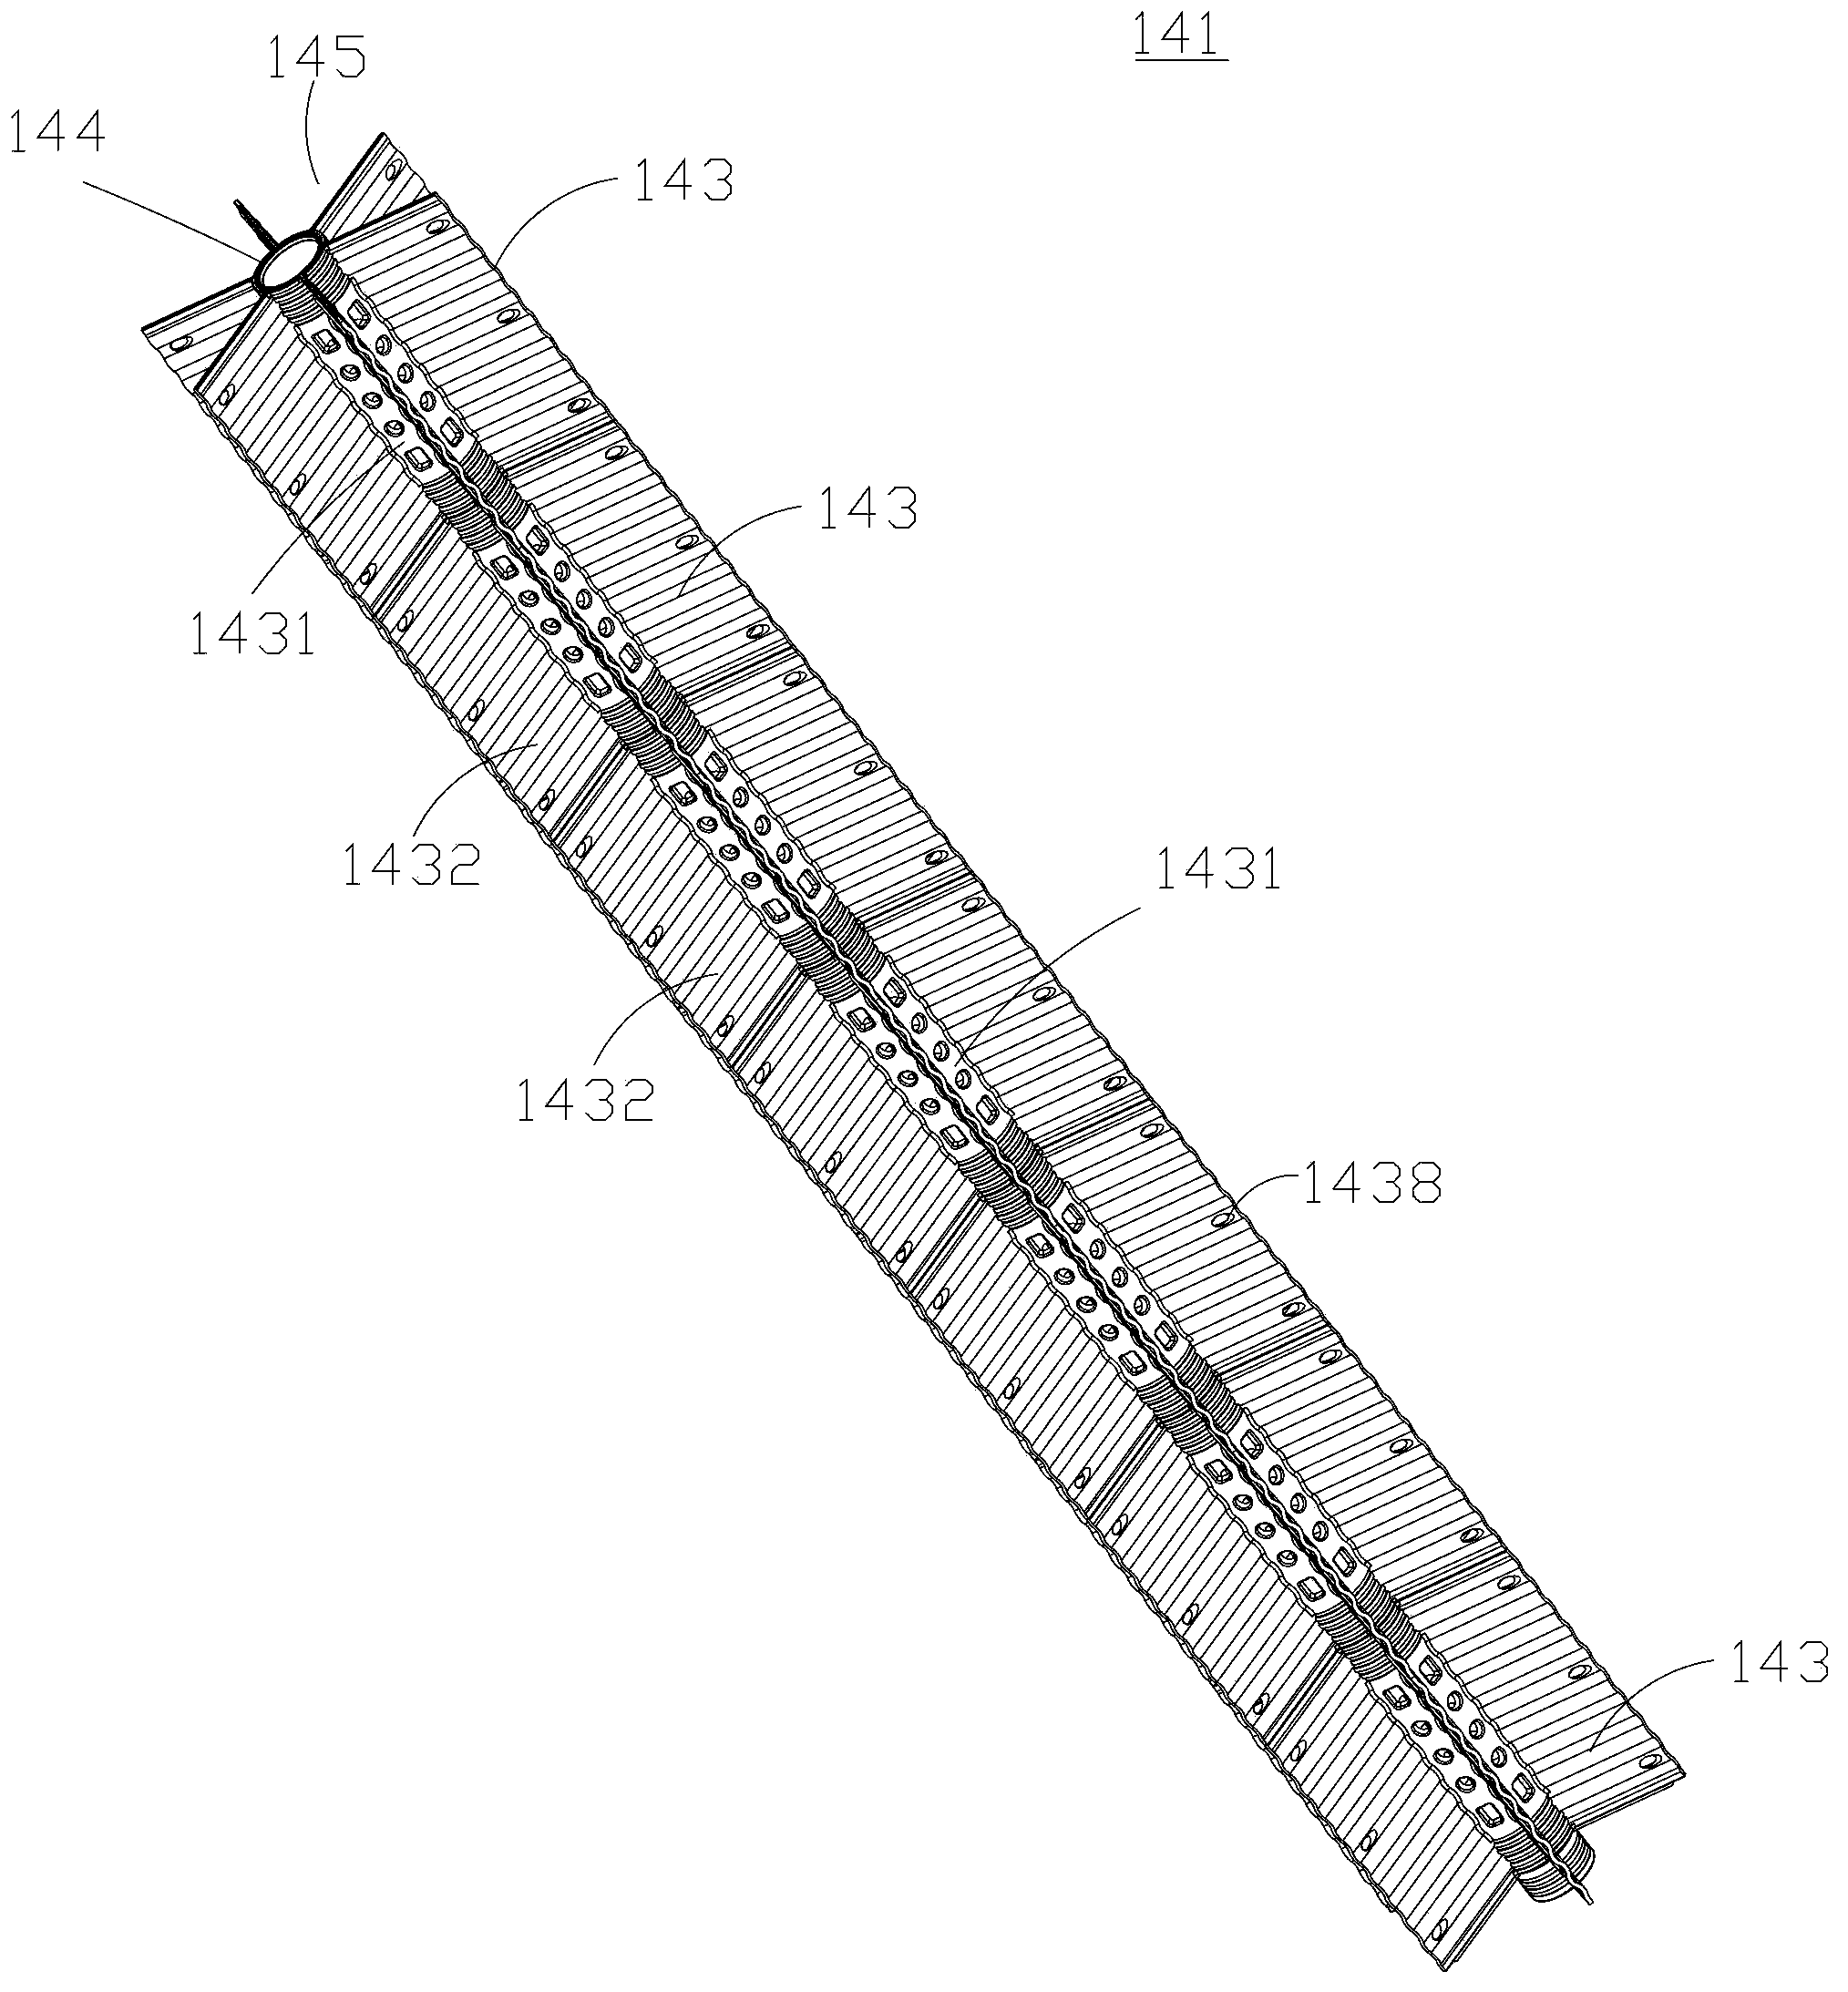 Hollow fiber membrane module and water treatment apparatus with it